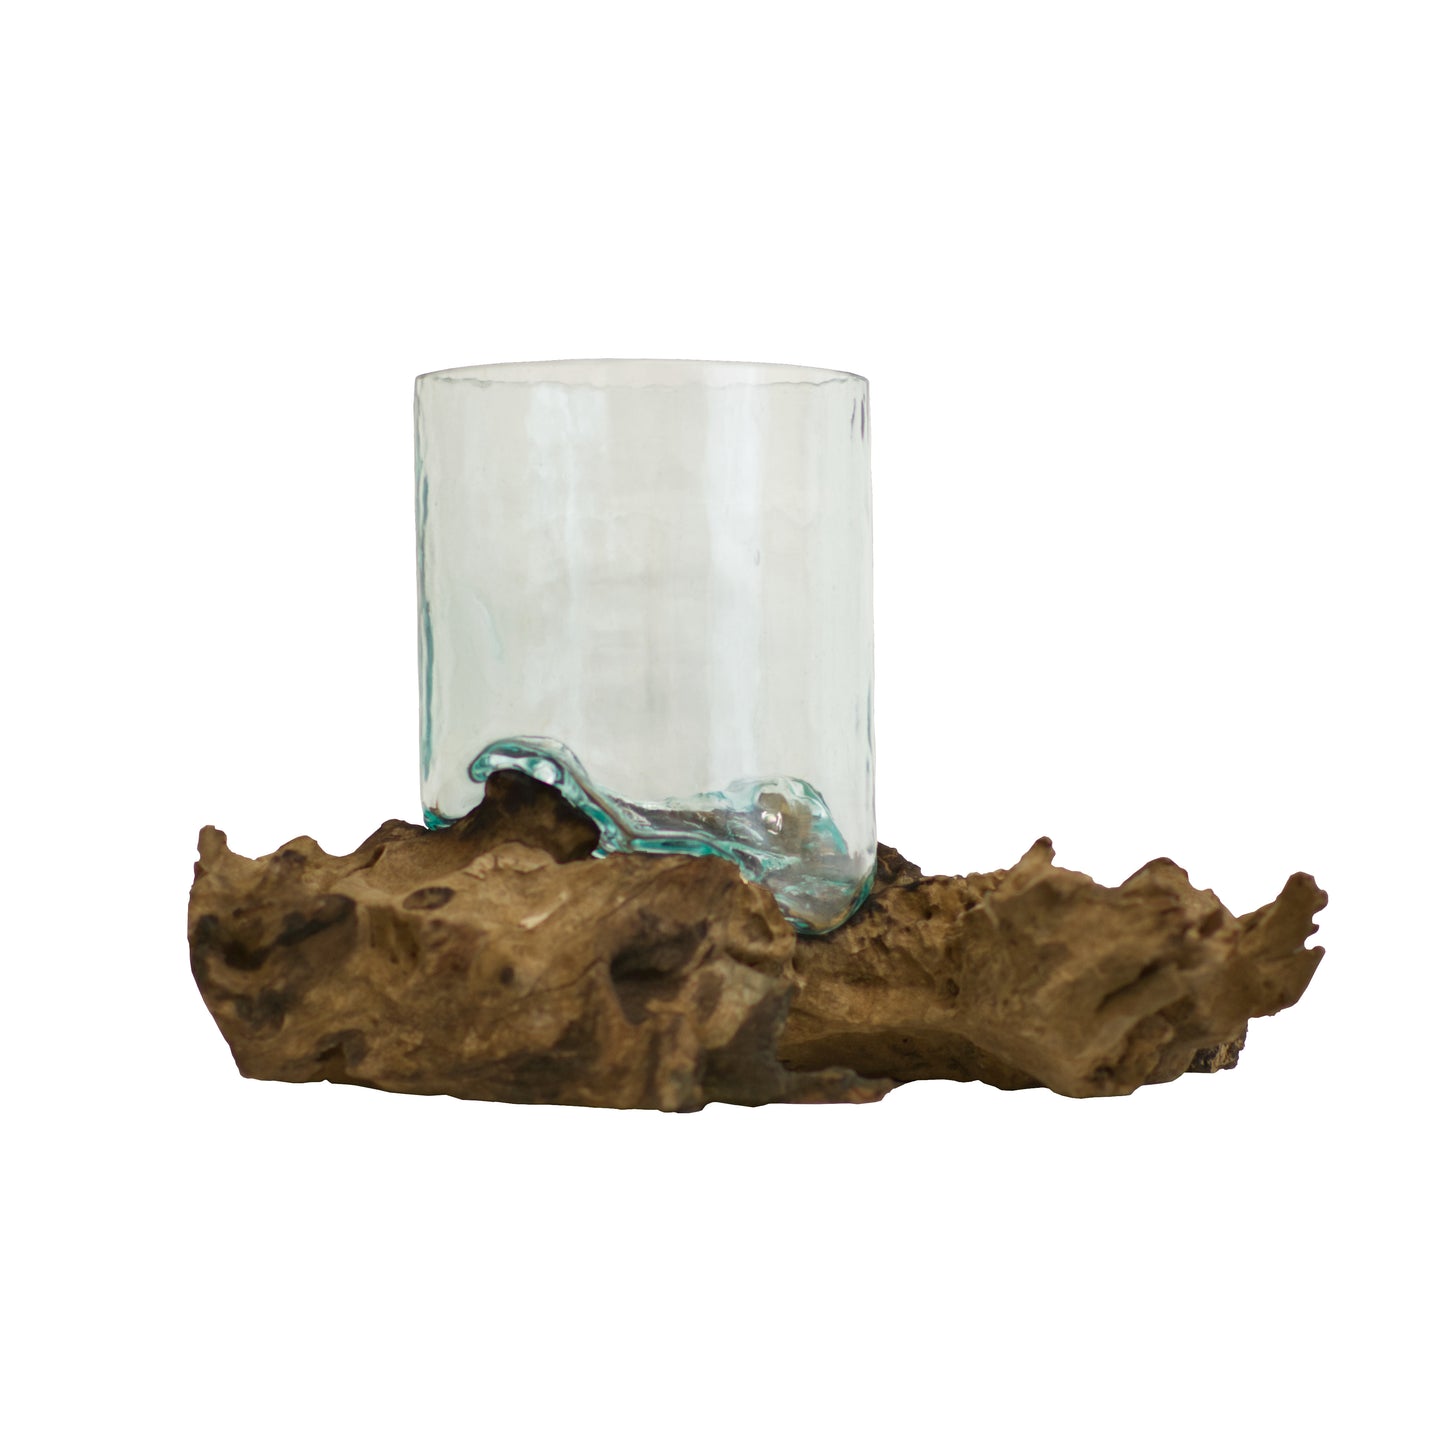 Cylindrical Molten Glass Vessel on Gamal Root